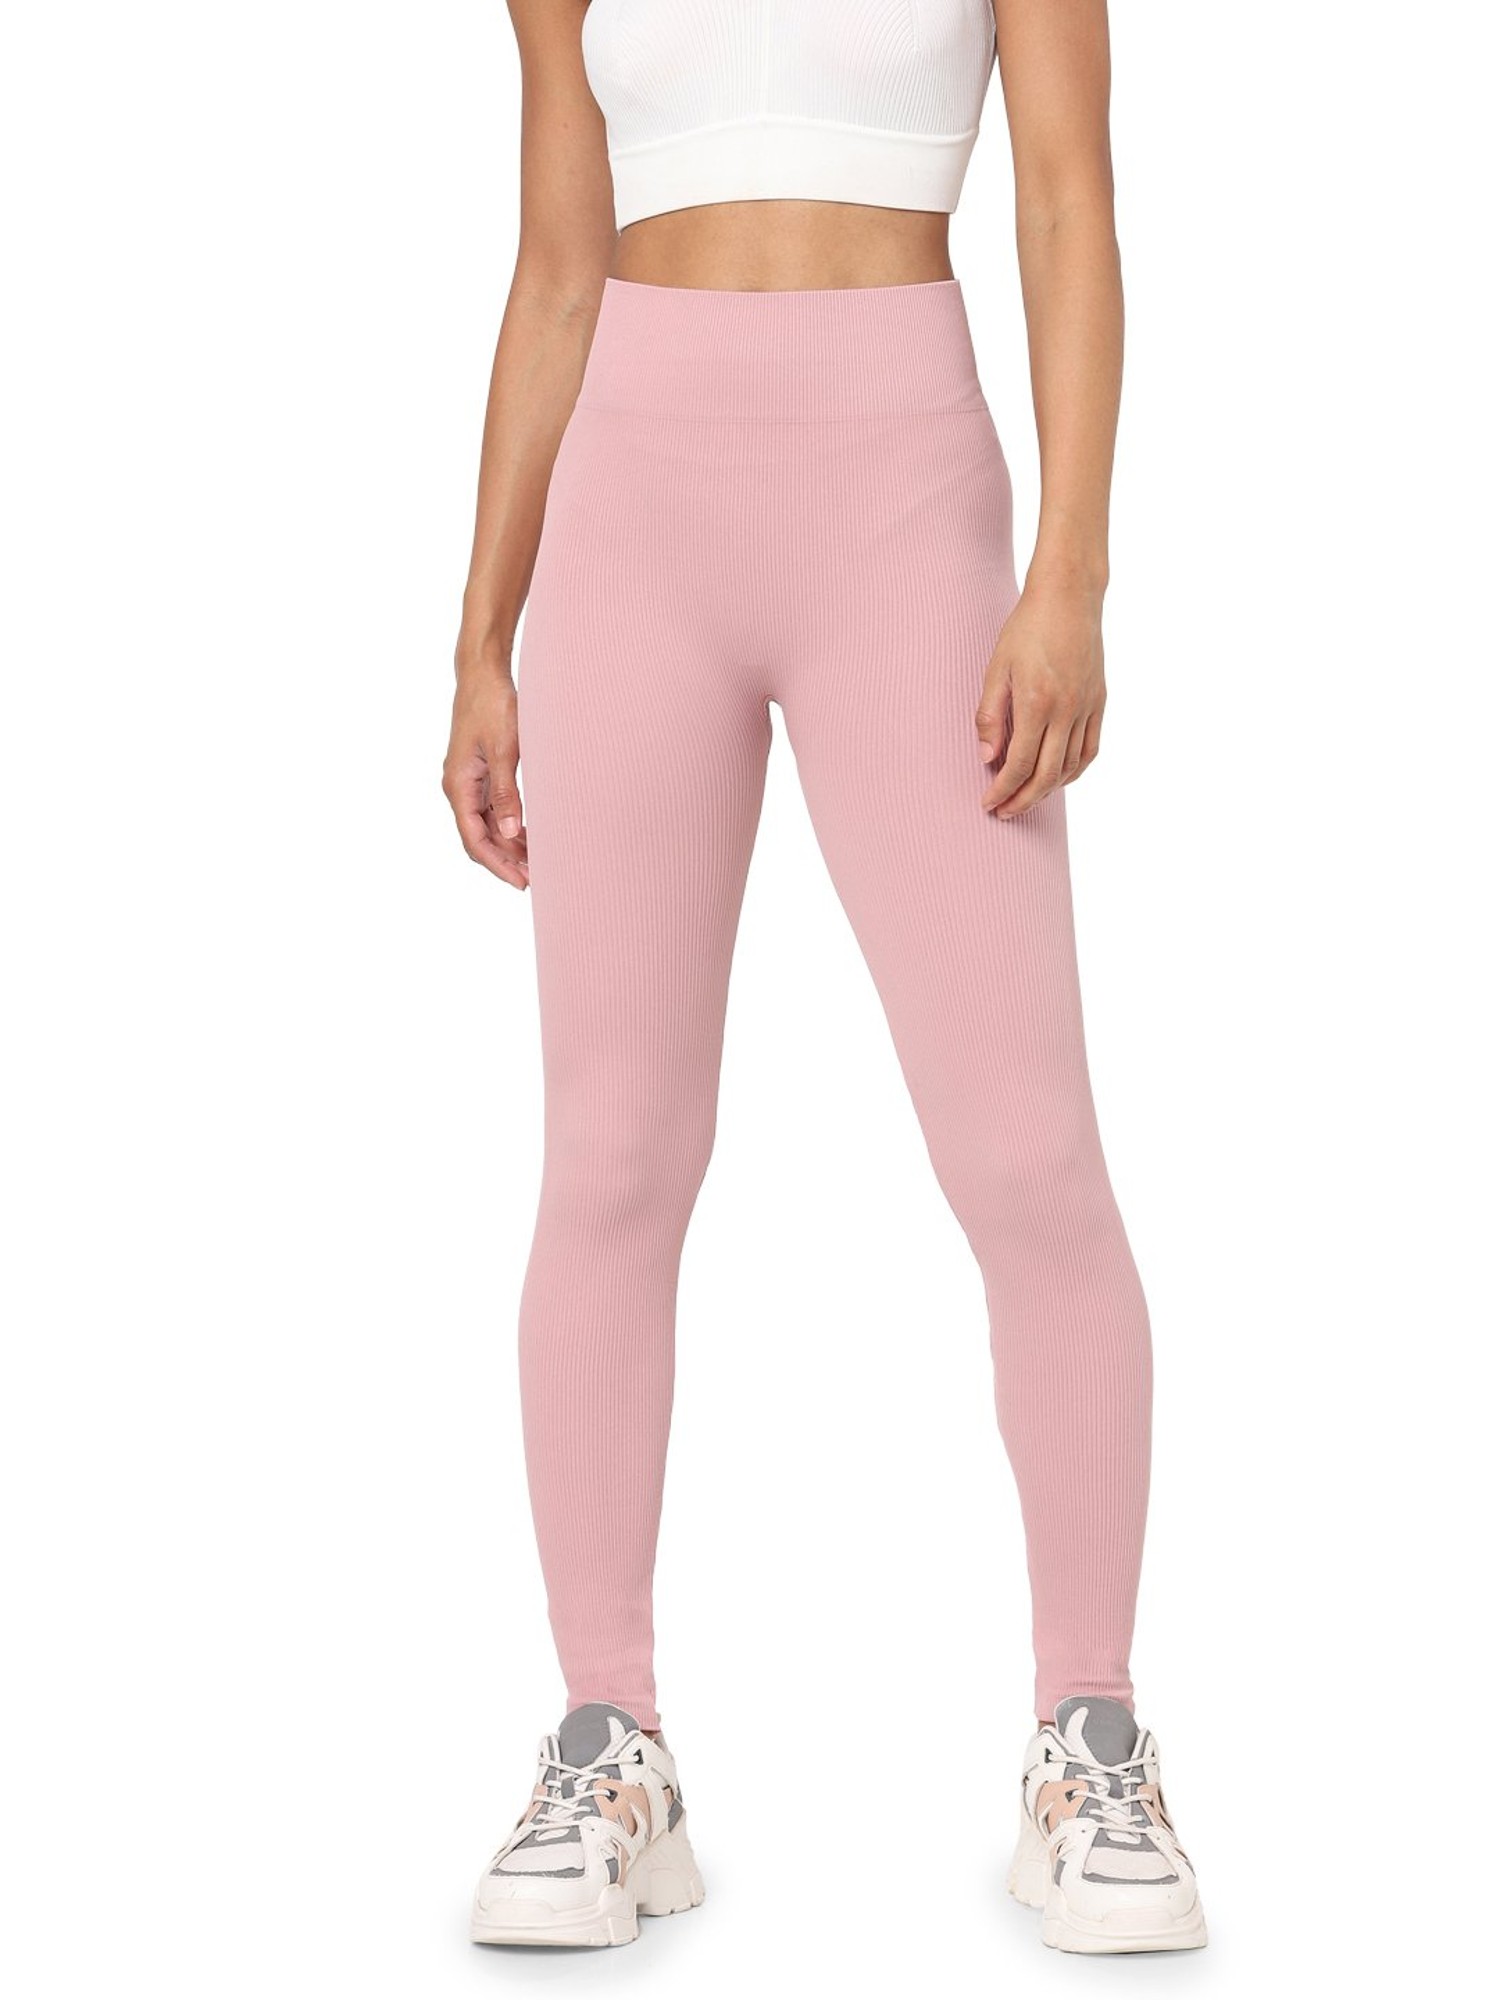 Leggings (Pink) for women | Buy online | ABOUT YOU